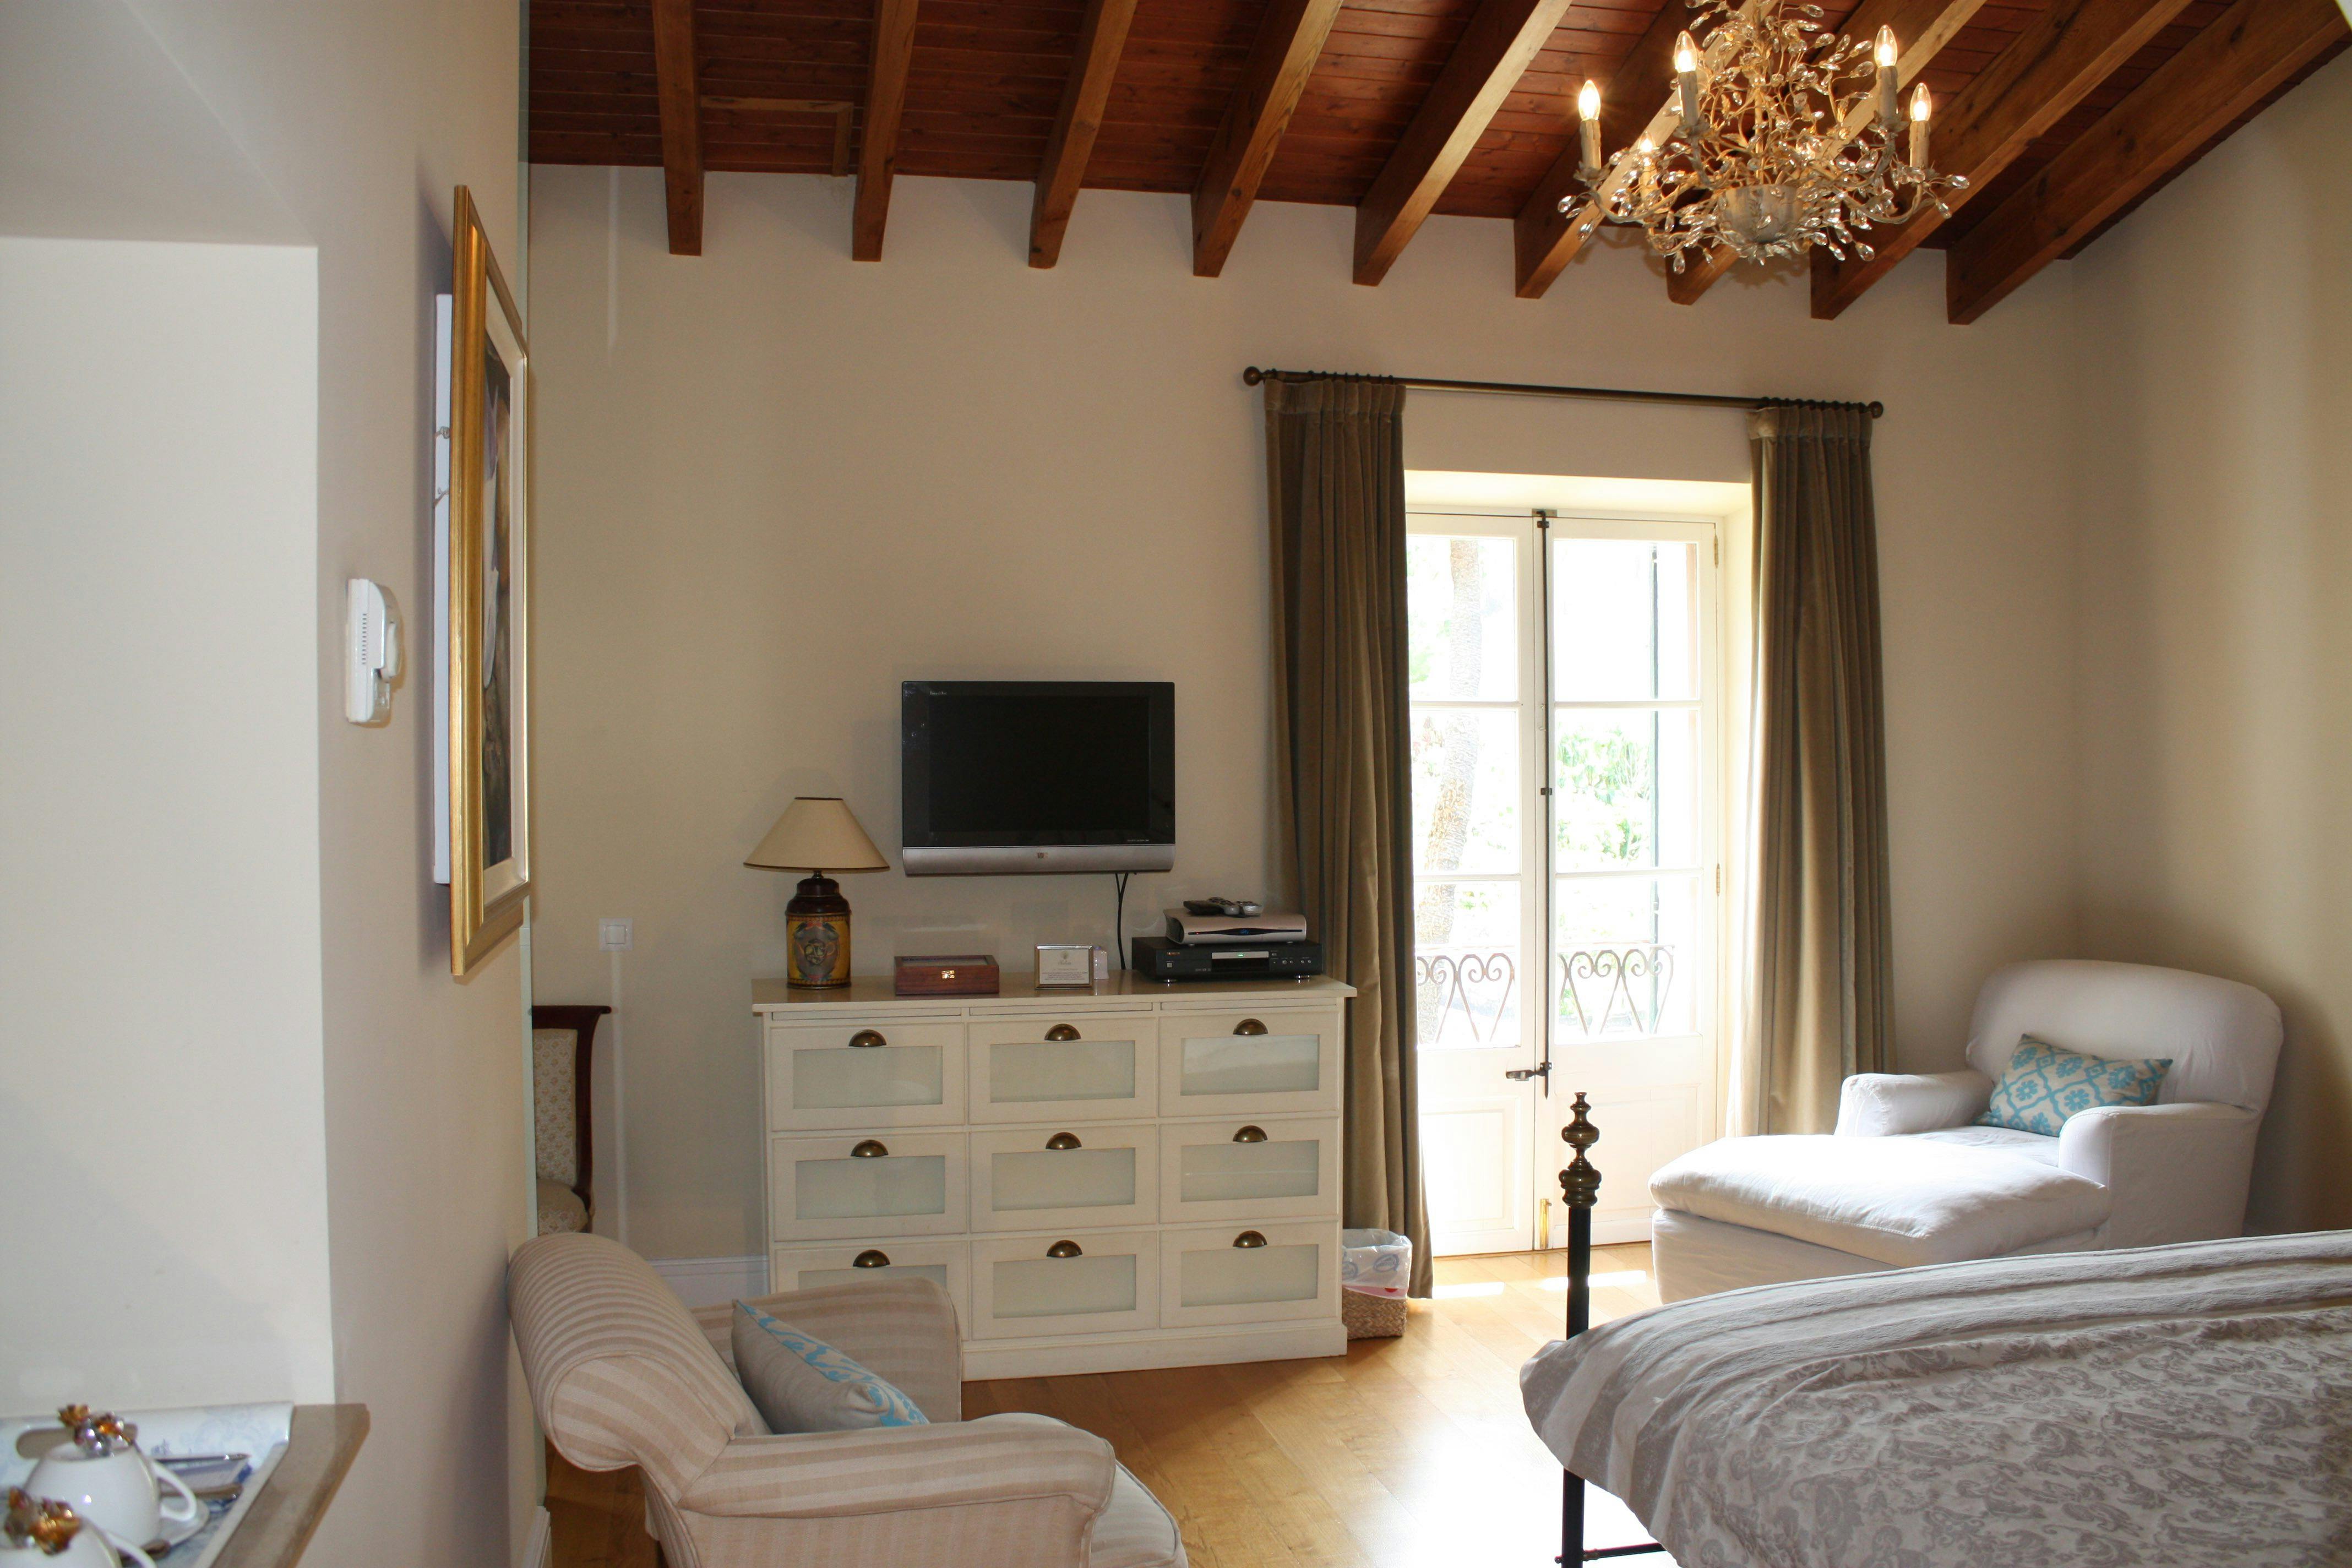 A view of the Deia Junior Suite looking towards the french windows